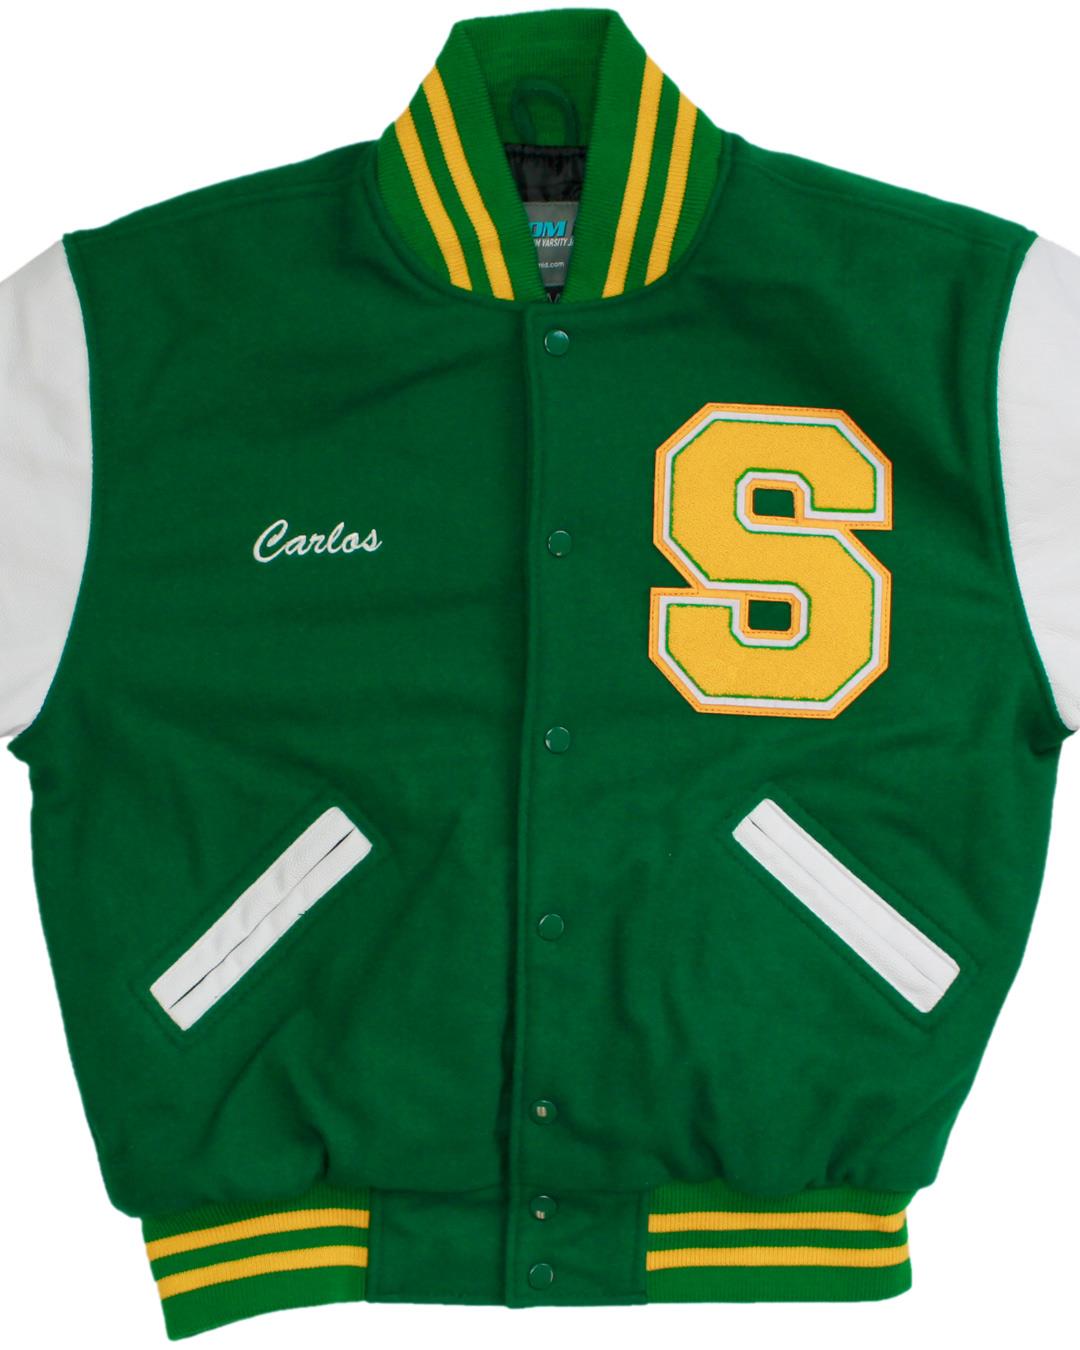 Suncoast High School Chargers Letterman Jacket, Riviera Beach, FL - Front